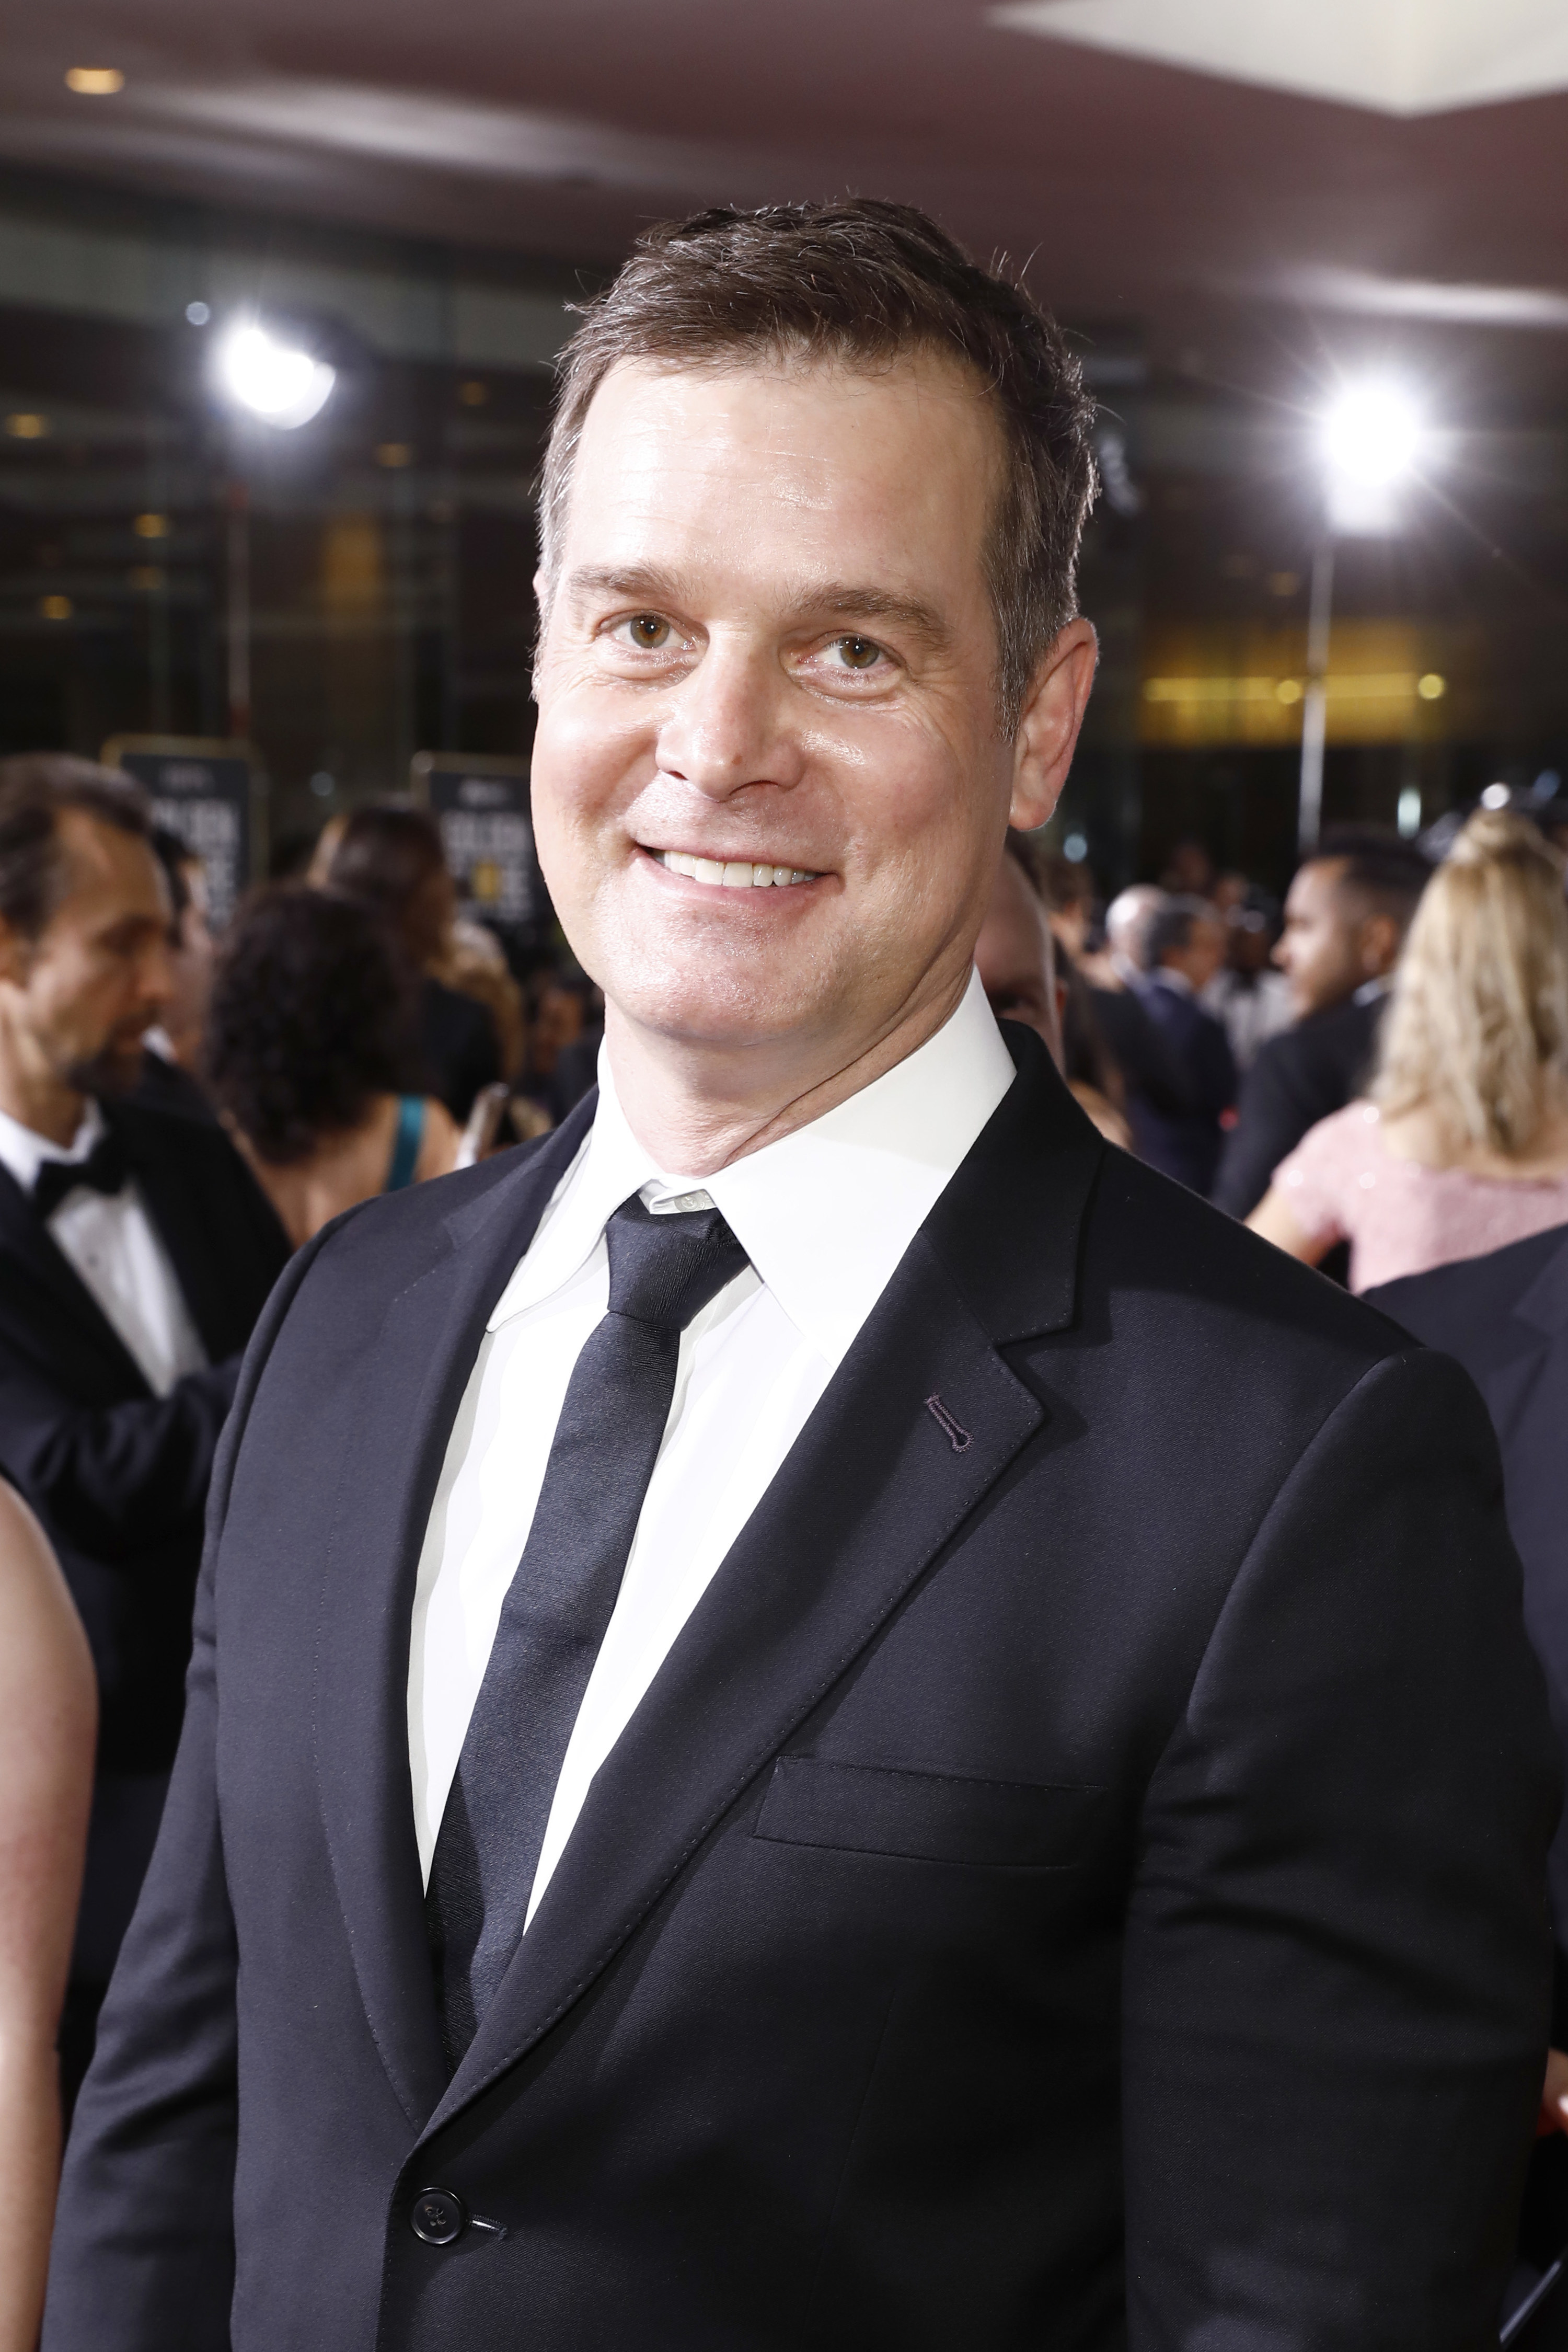 Peter in a suit at a red carpet event